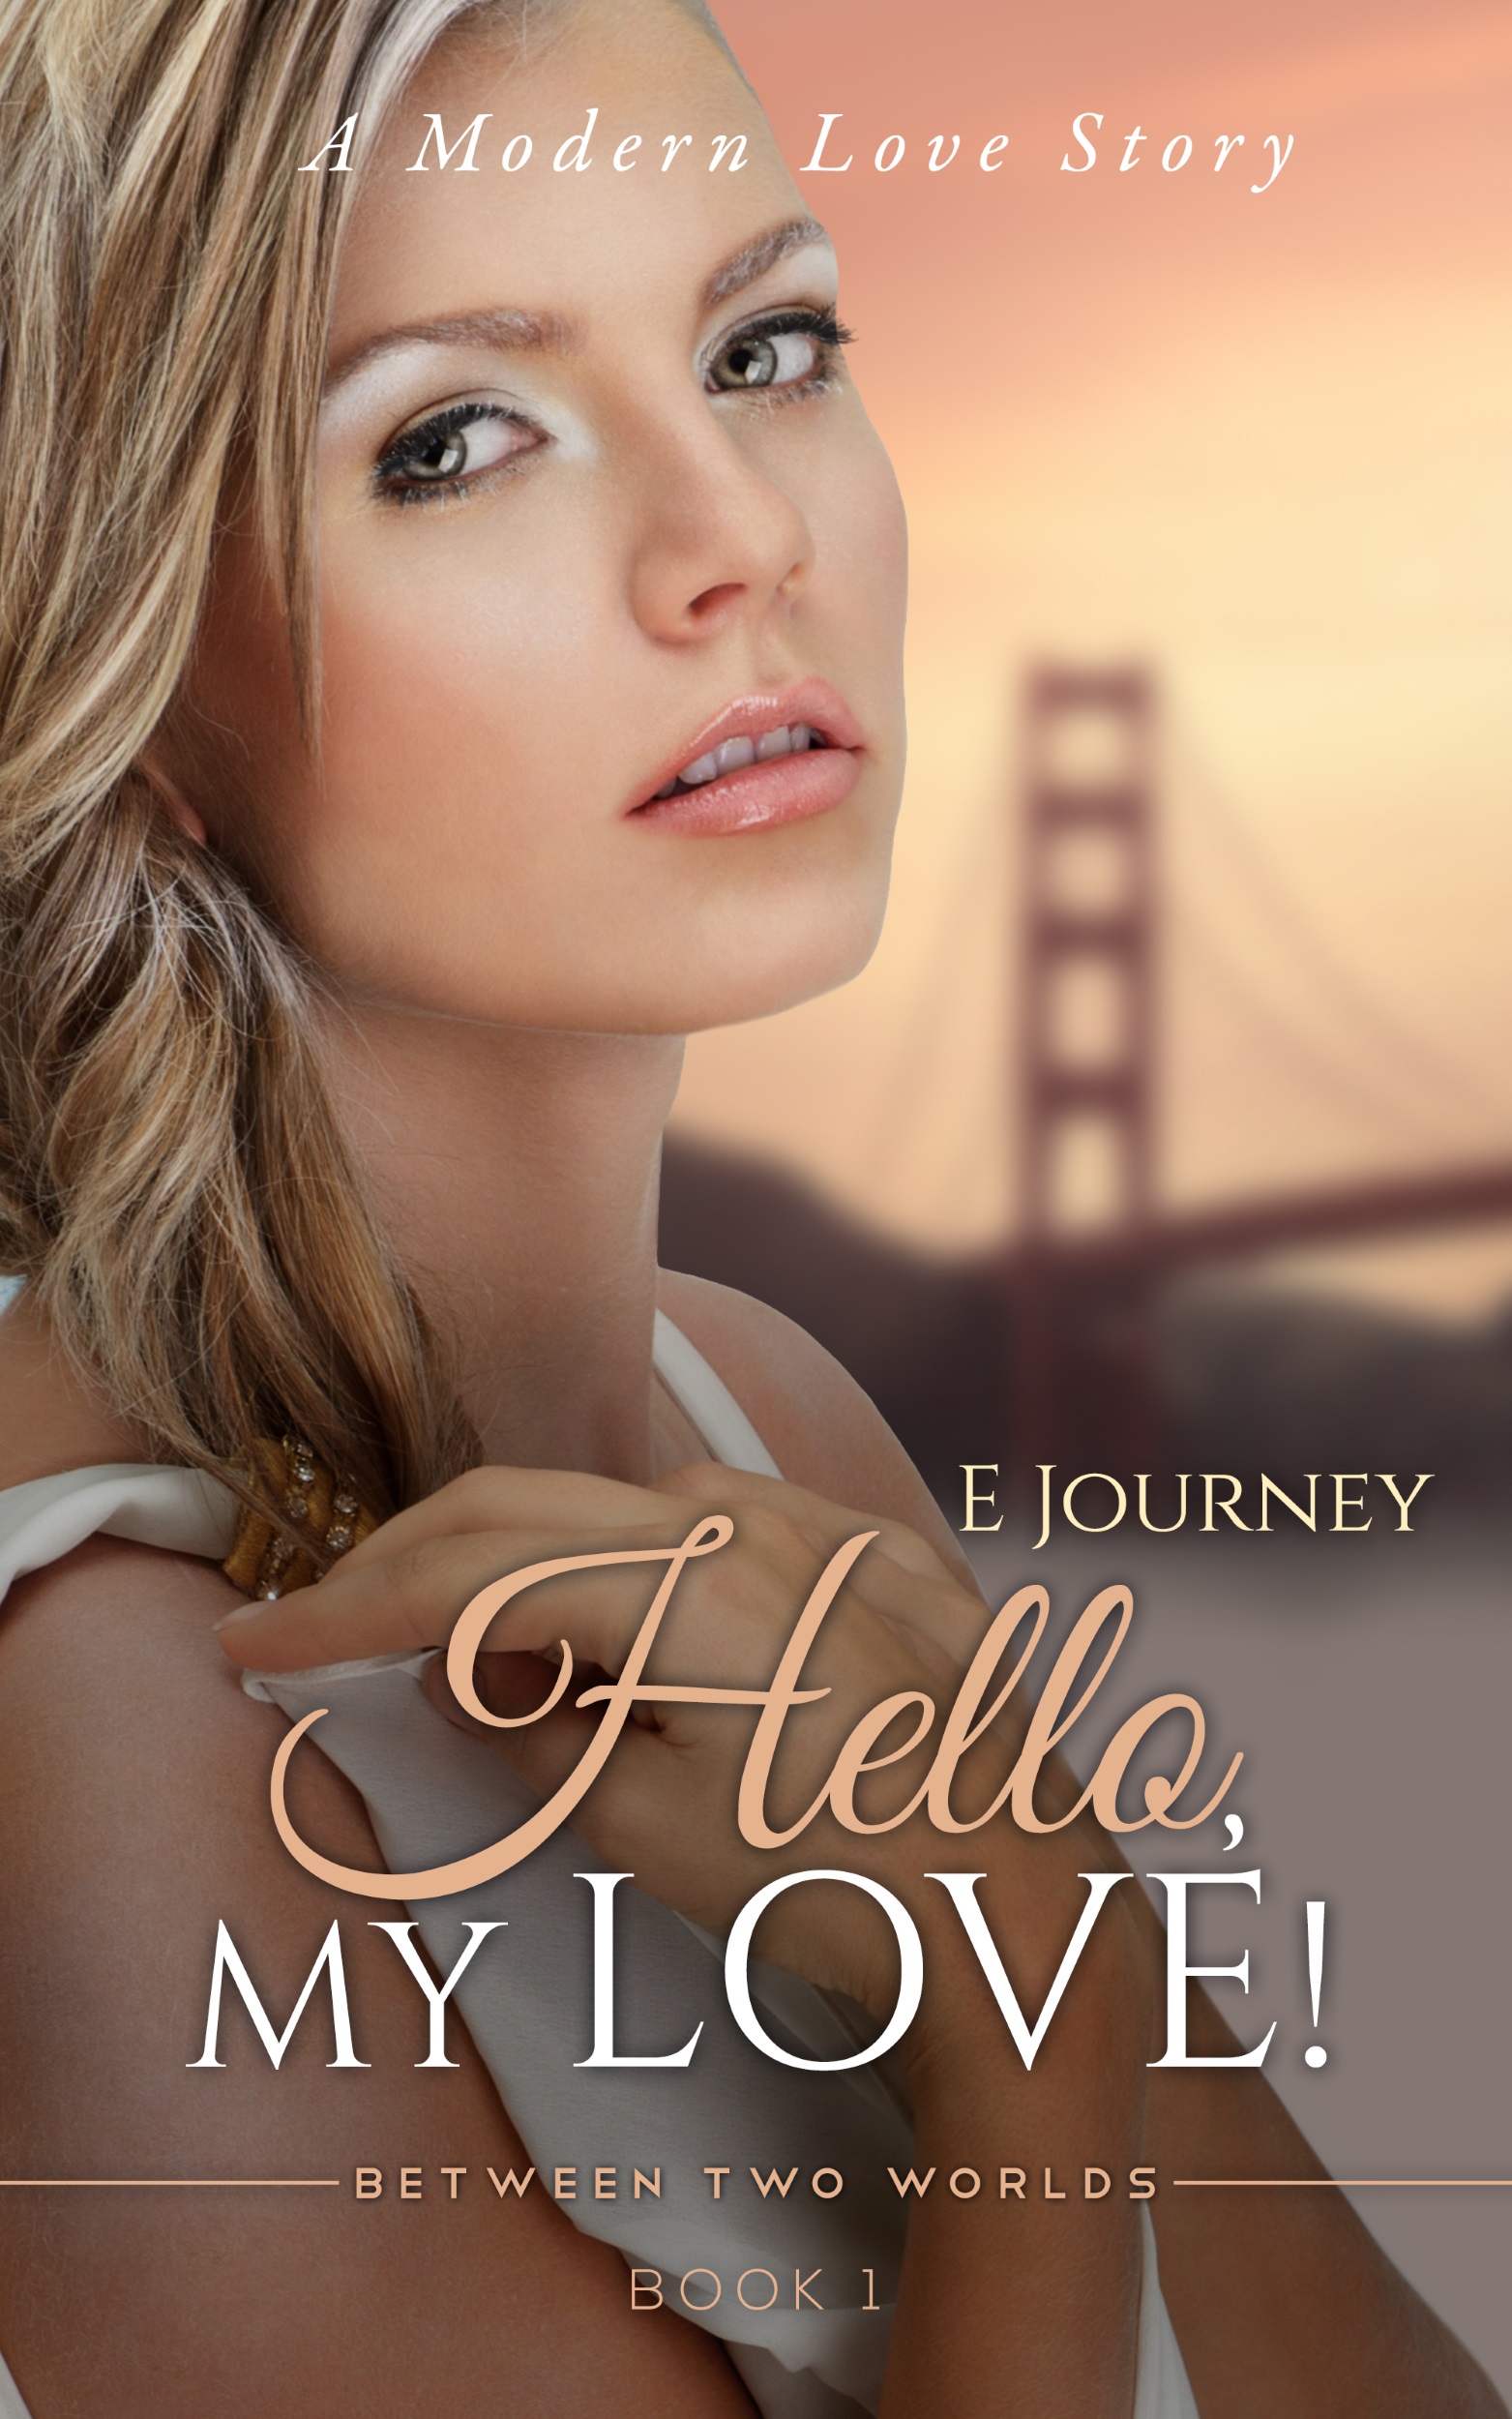 Hello, My Love!  (aka: A Modern Love Story) (Between Two Worlds Book 1)